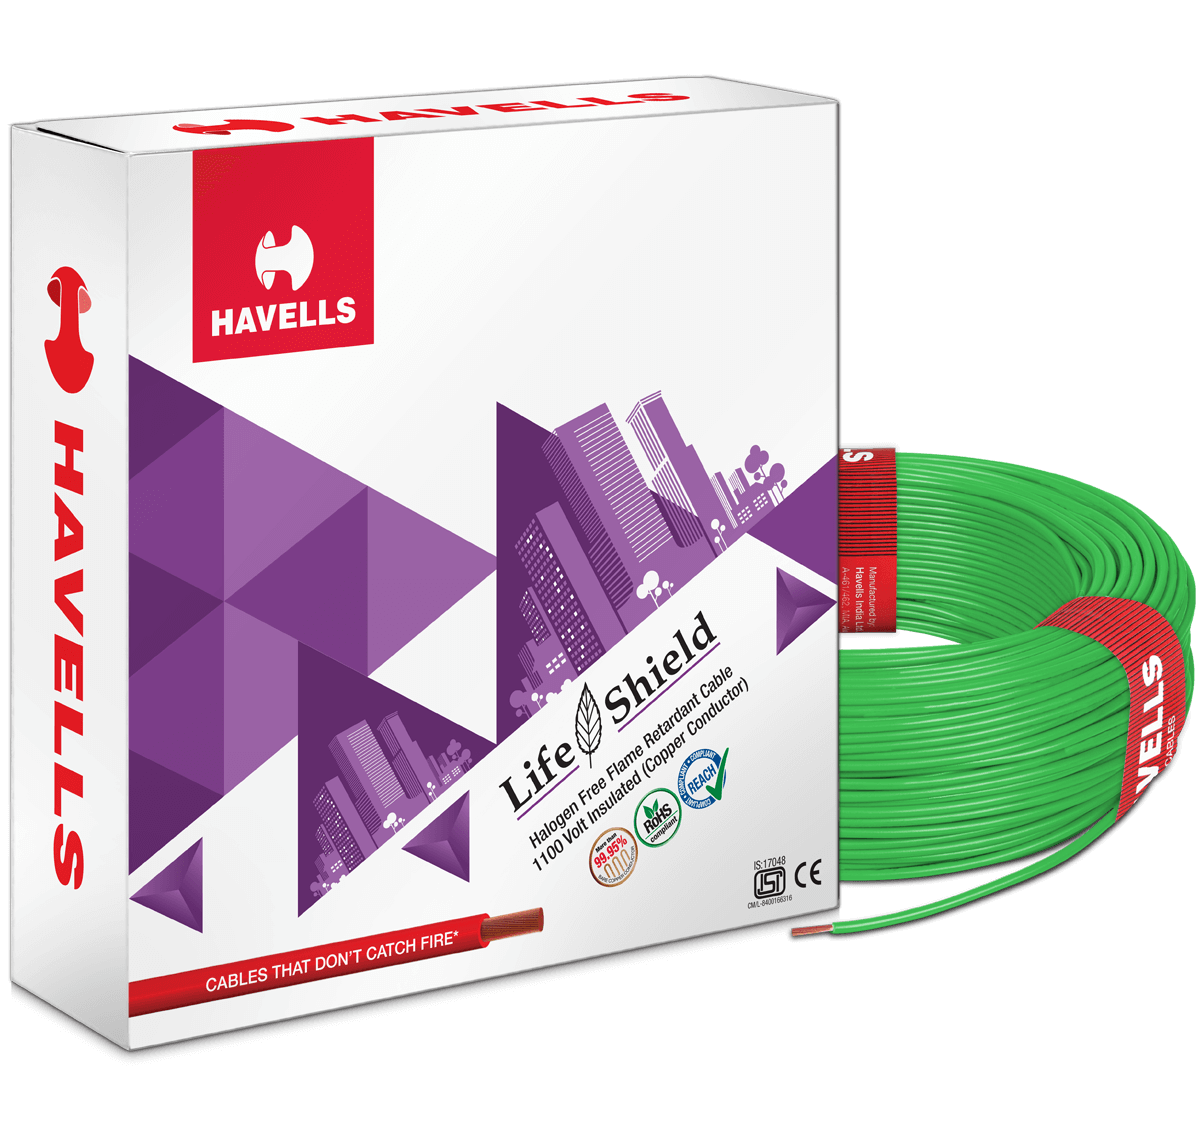 Life Shield HFFR Cables (Green)